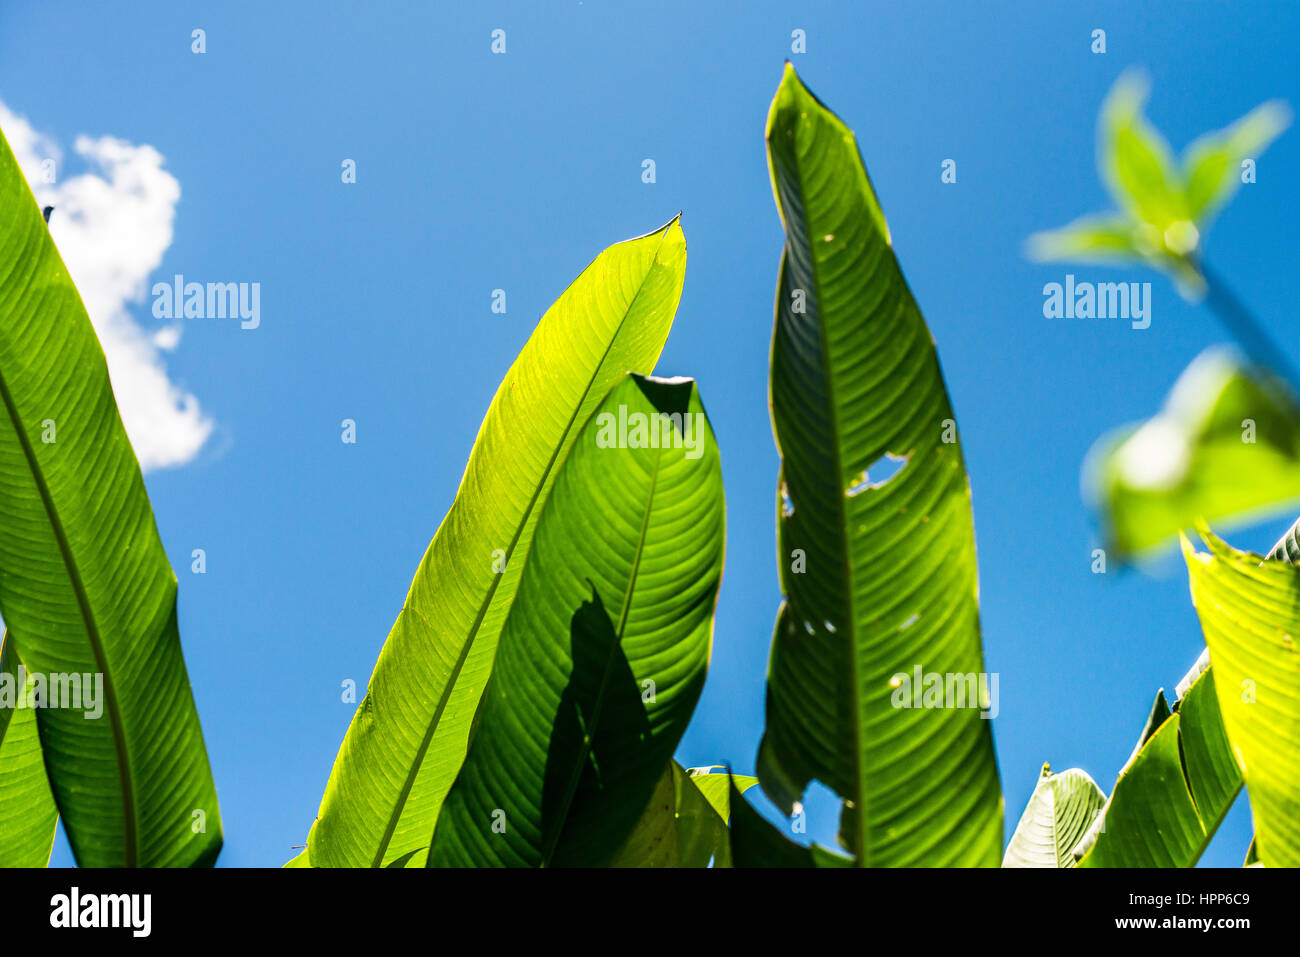 relaxing view over banana leaves Stock Photo